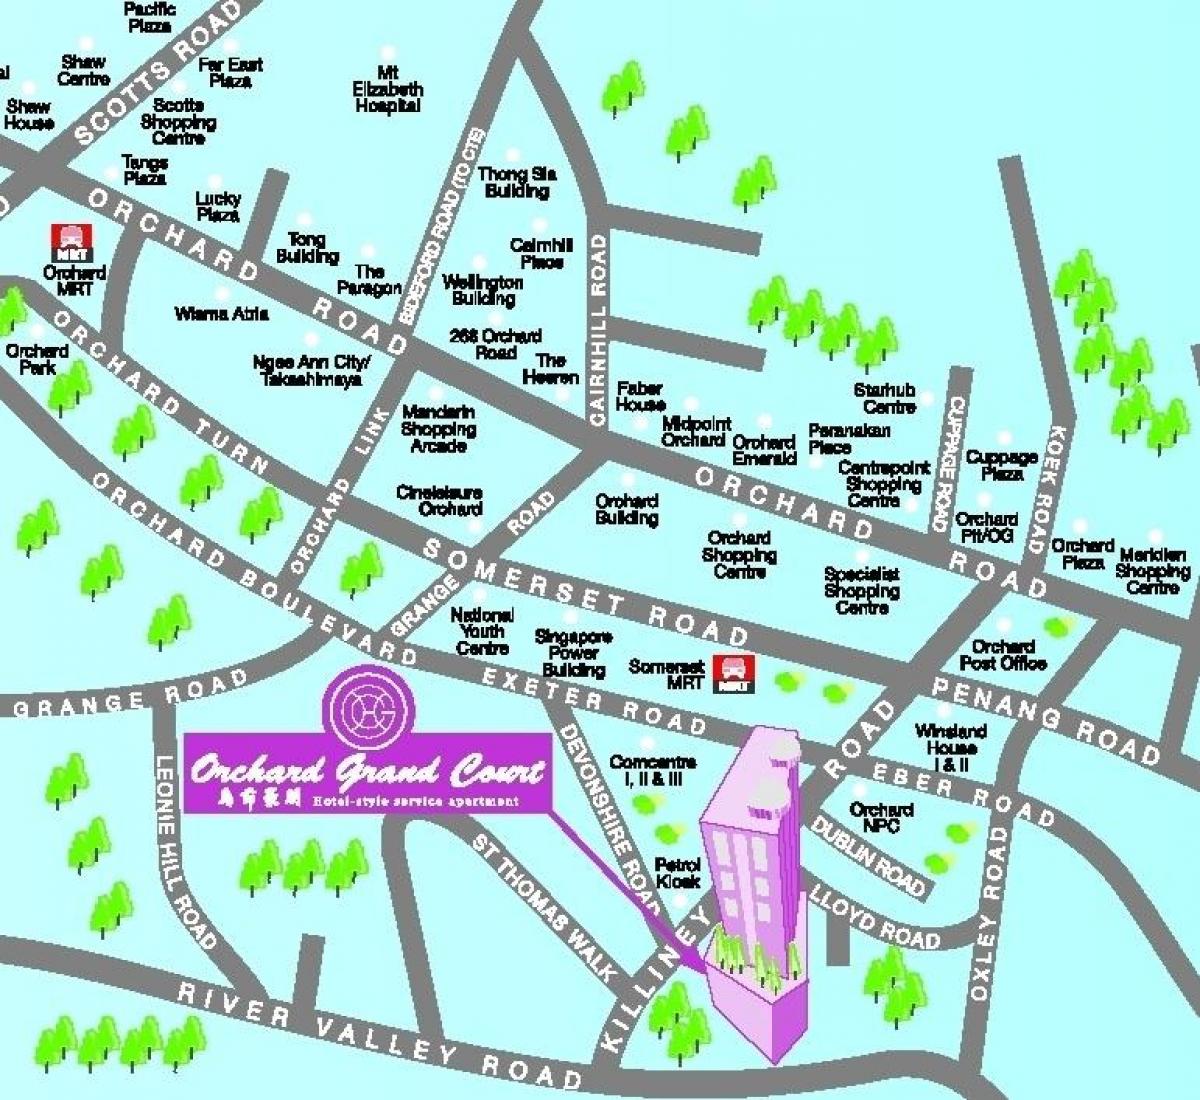 Orchard Road Map Orchard Road Singapore Map Republic Of Singapore